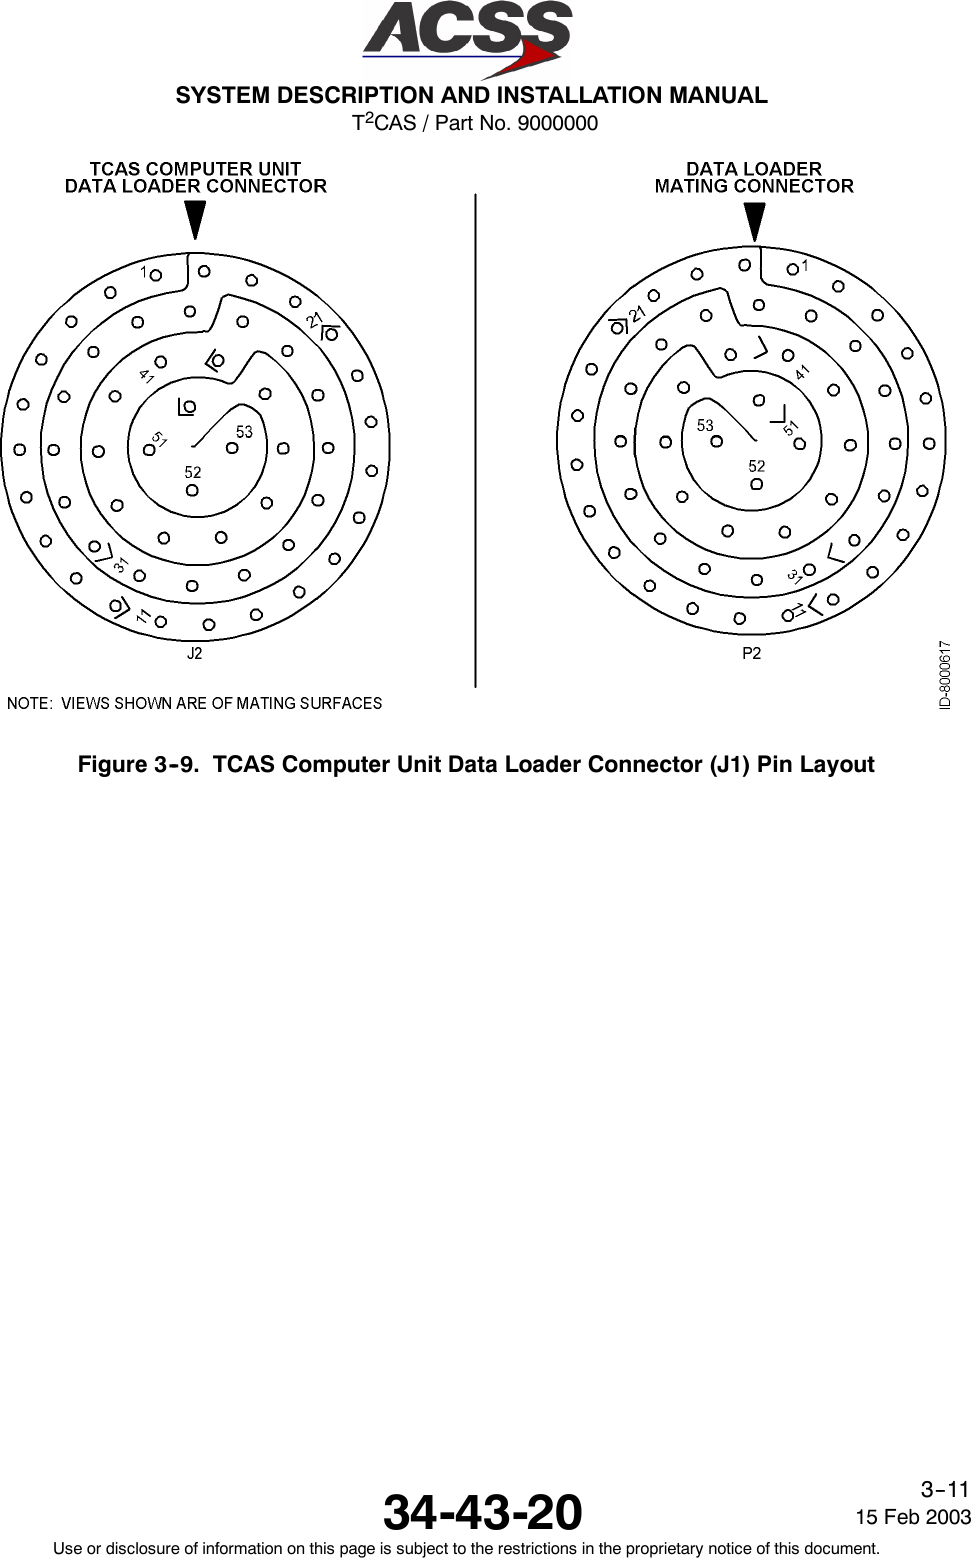 T2CAS / Part No. 9000000SYSTEM DESCRIPTION AND INSTALLATION MANUAL34-43-20 15 Feb 2003Use or disclosure of information on this page is subject to the restrictions in the proprietary notice of this document.3--11Figure 3--9. TCAS Computer Unit Data Loader Connector (J1) Pin Layout